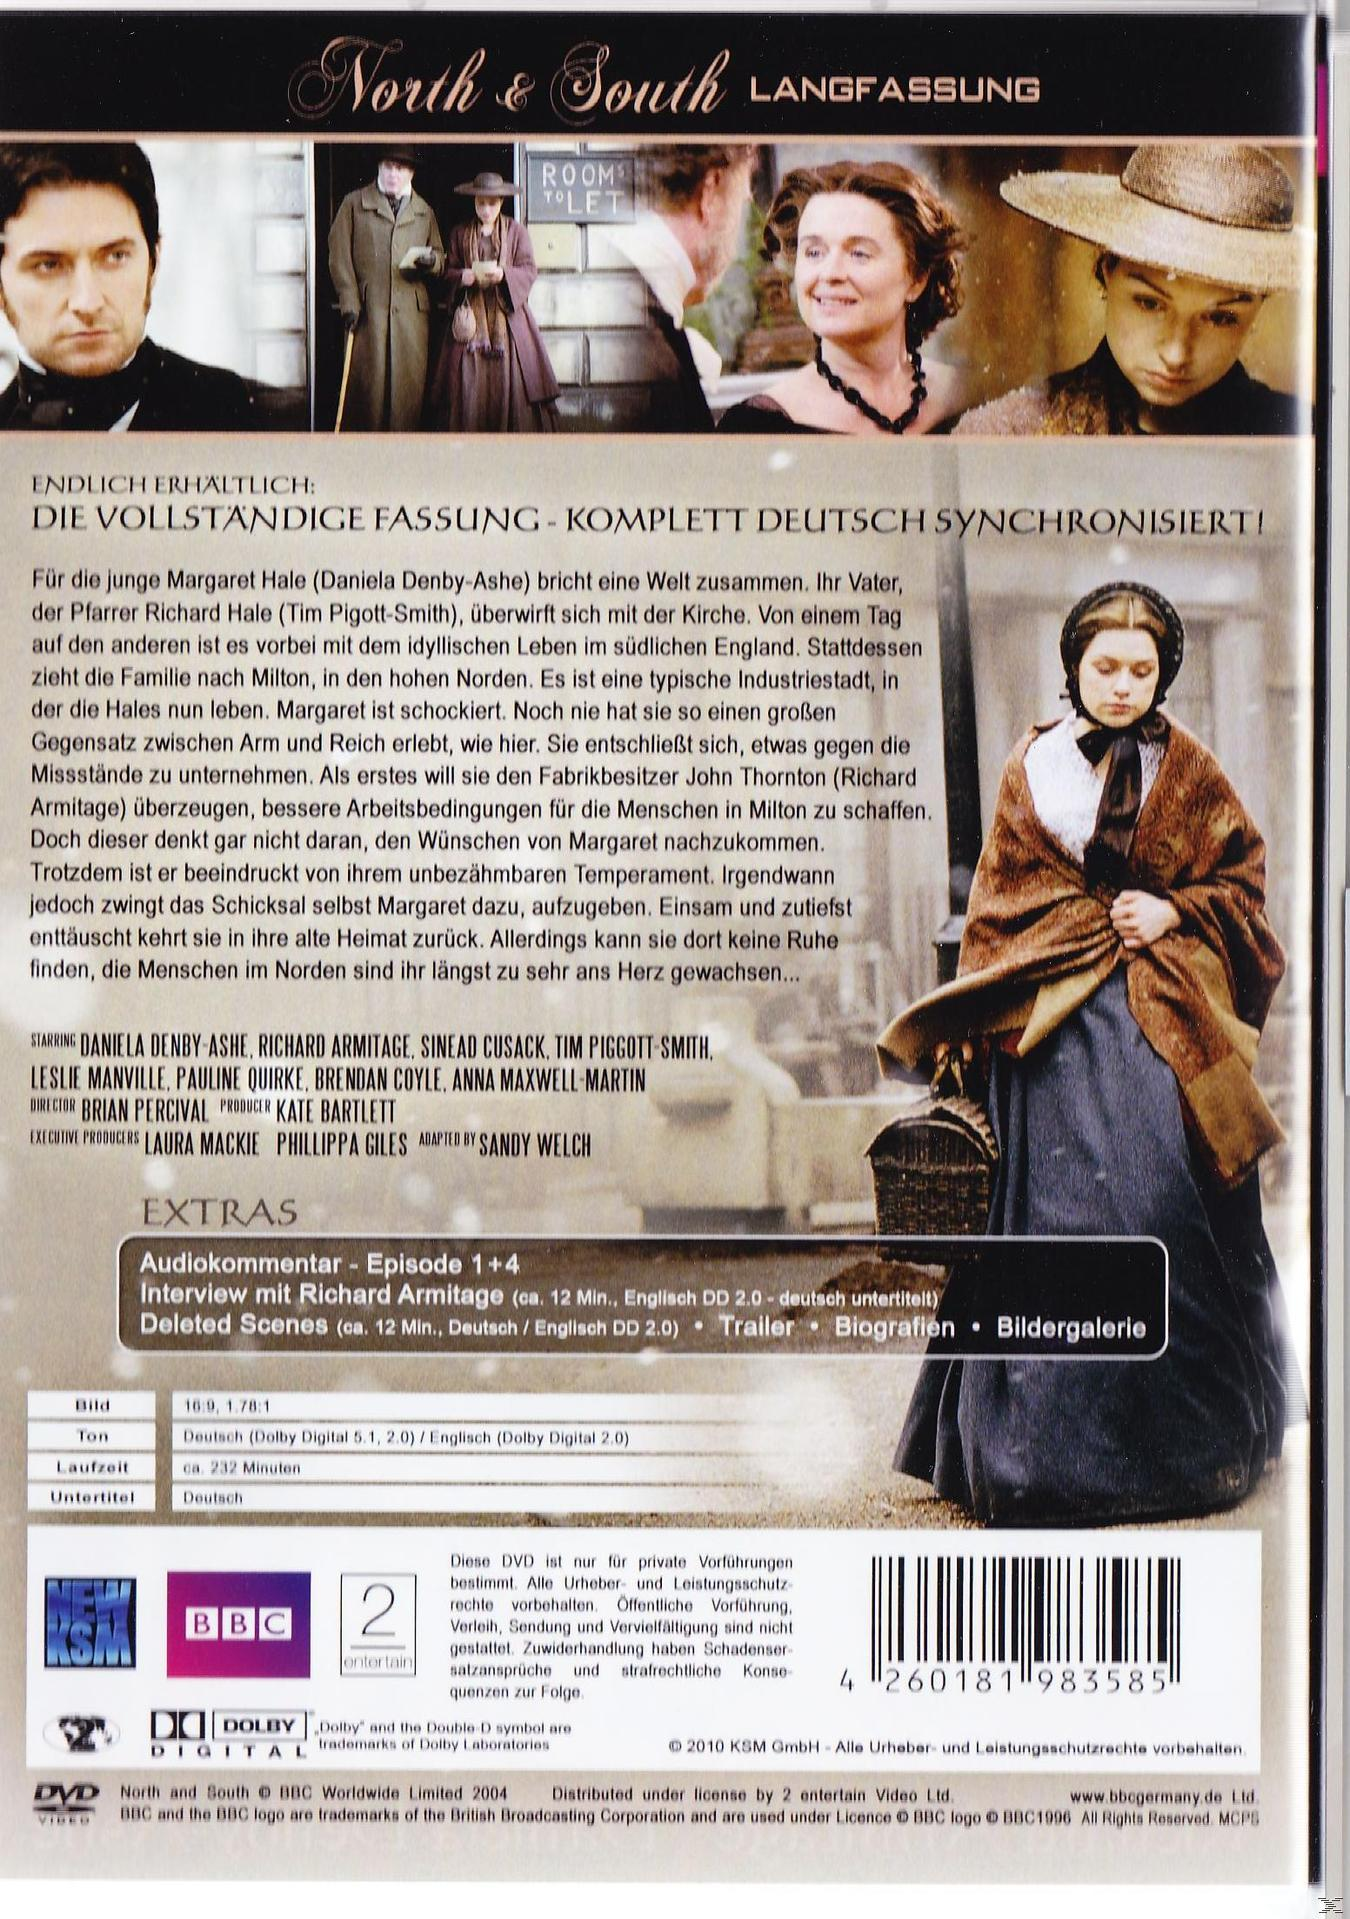 DVD South and North